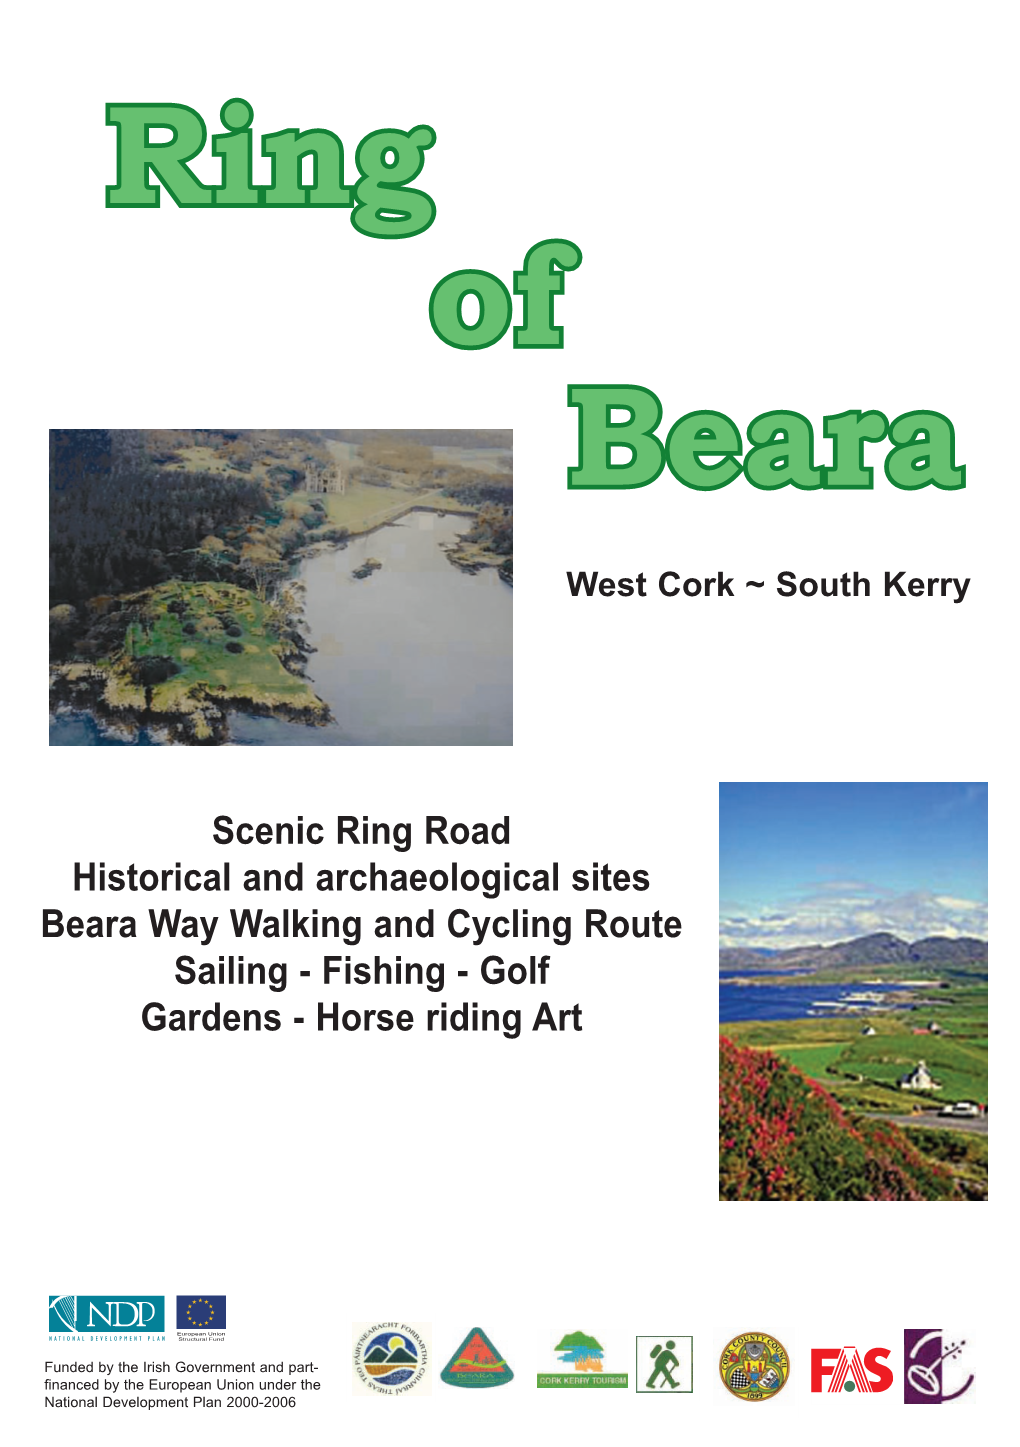 Scenic Ring Road Historical and Archaeological Sites Beara Way Walking and Cycling Route Sailing - Fishing - Golf Gardens - Horse Riding Art